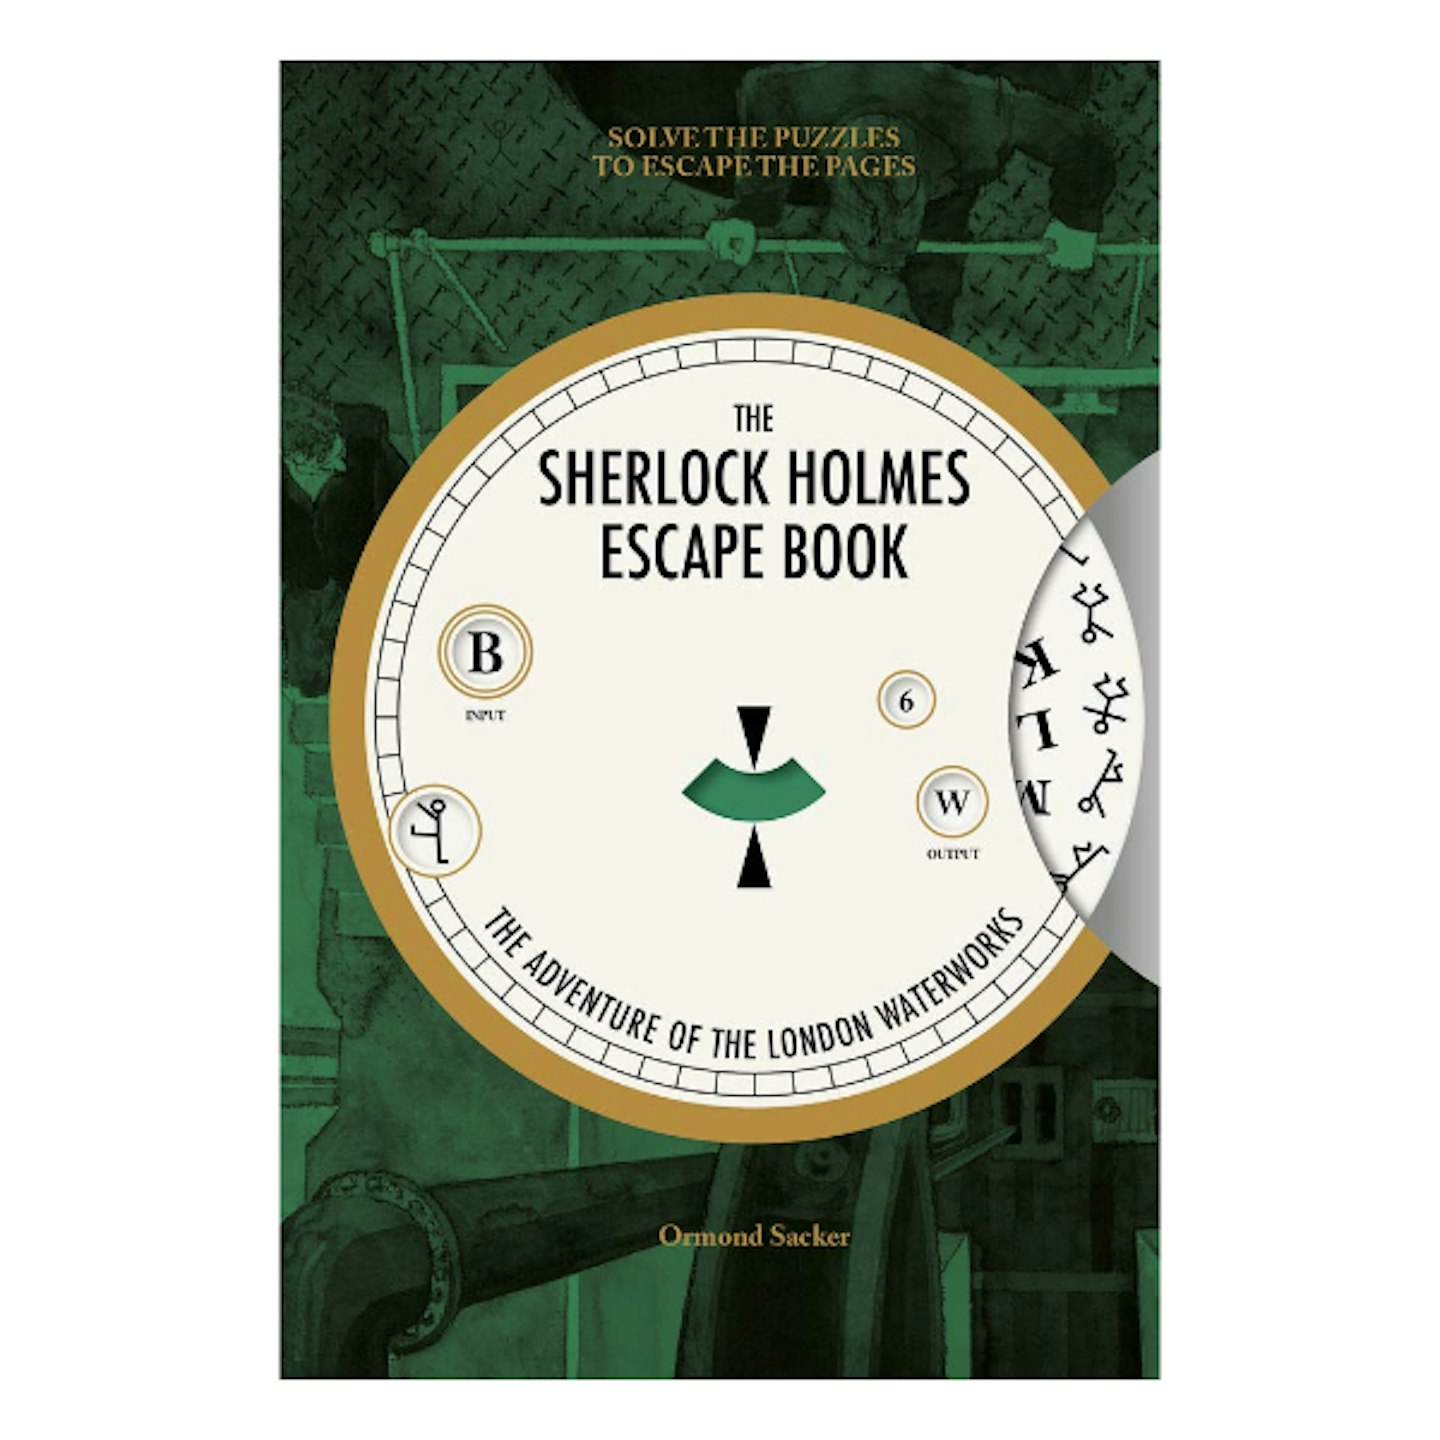 The Sherlock Holmes Escape Book: The Adventure of the London Waterworks